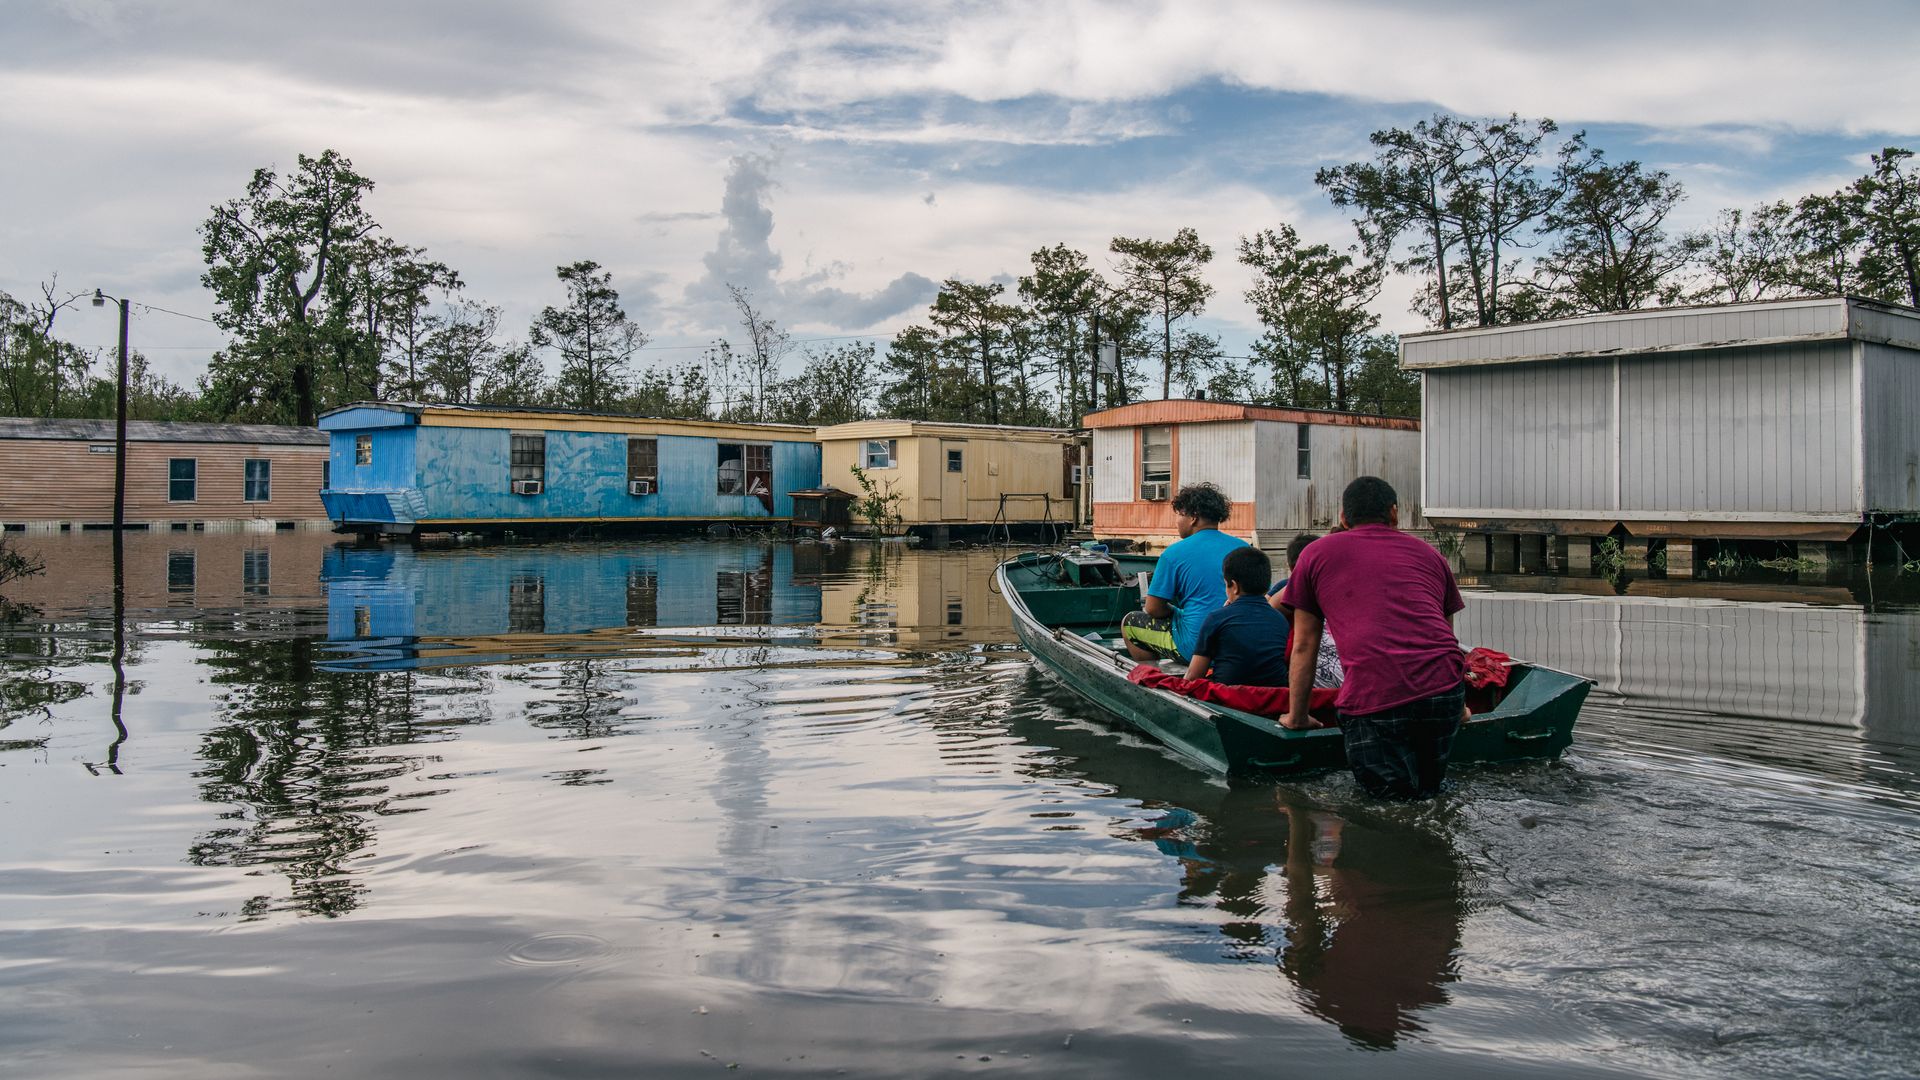 A family of four, with their backs to the camera, motors along in a small boat through a flooded neighborhood. Mobile homes and a cloudy sky can be seen in the background.